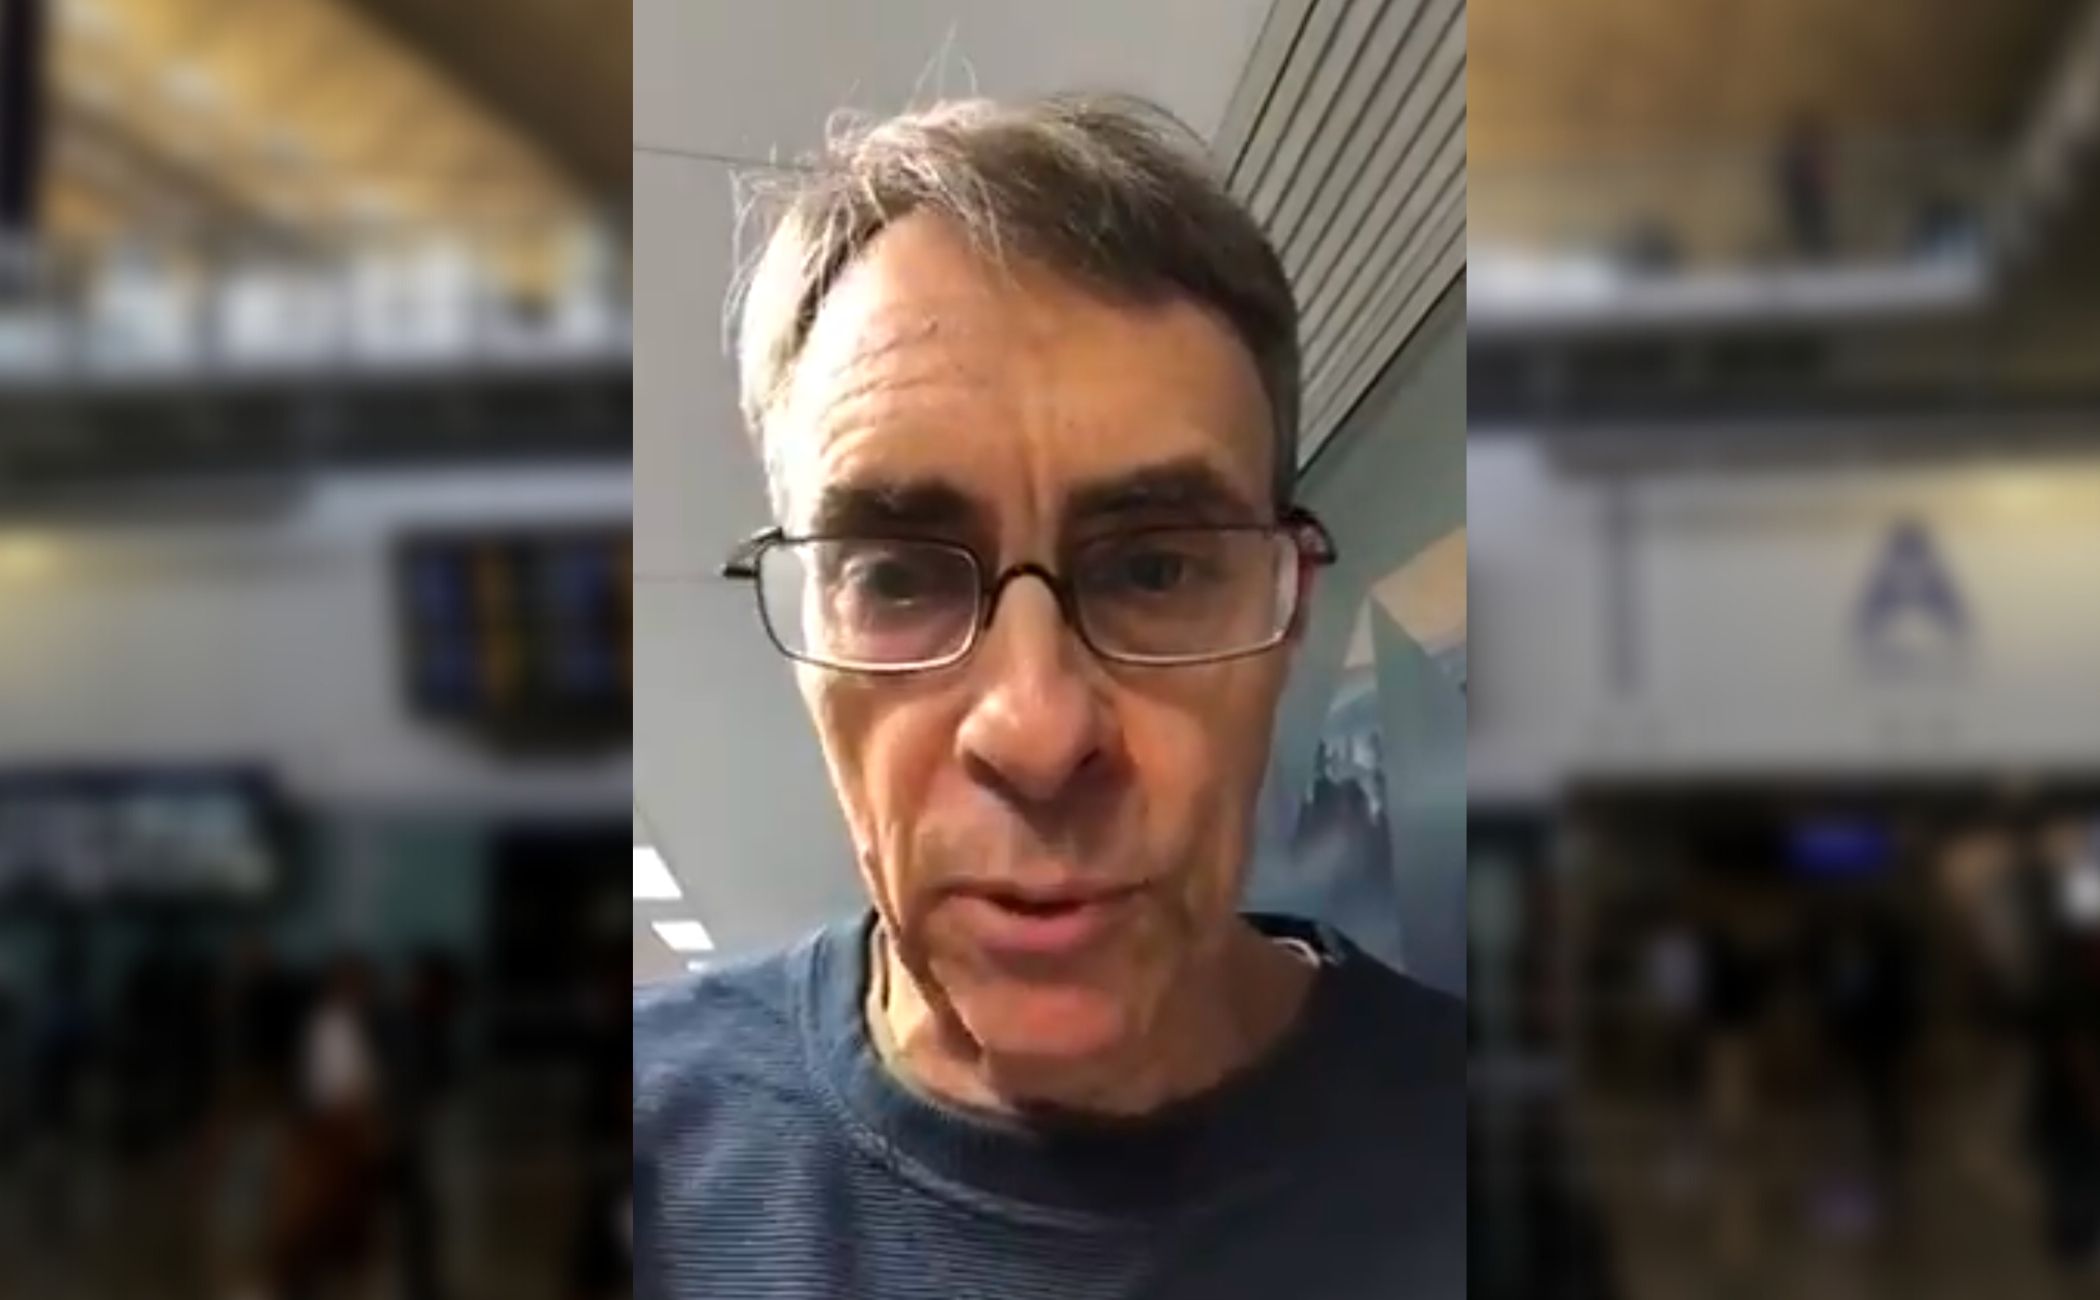 HRW head Kenneth Roth speaks in a video message revealing Hong Kong authorities’ decision to bar him from entering the city. Photo via Twitter.